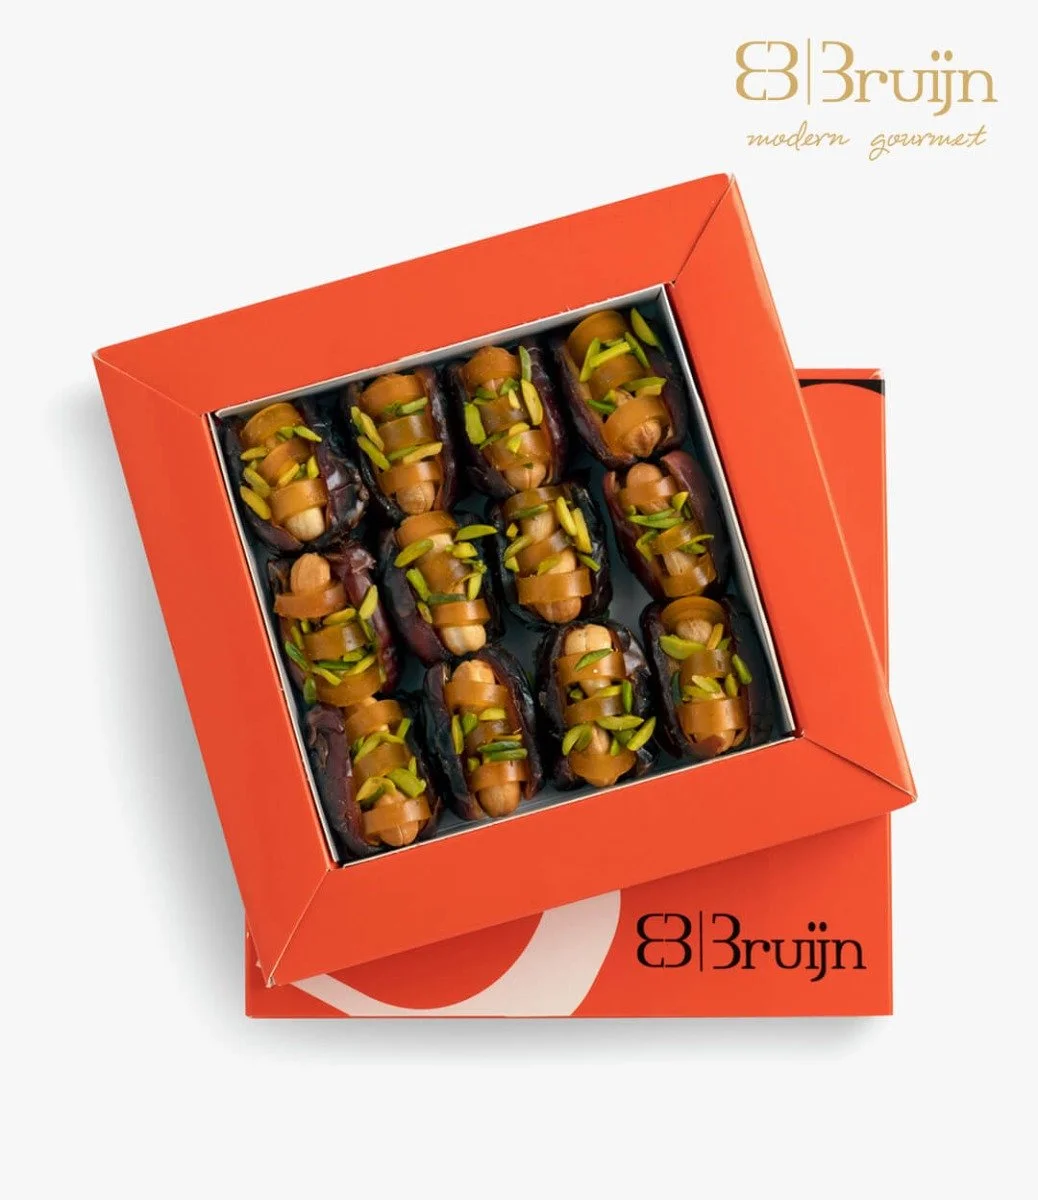 Tasty Dates Collection by Bruijn